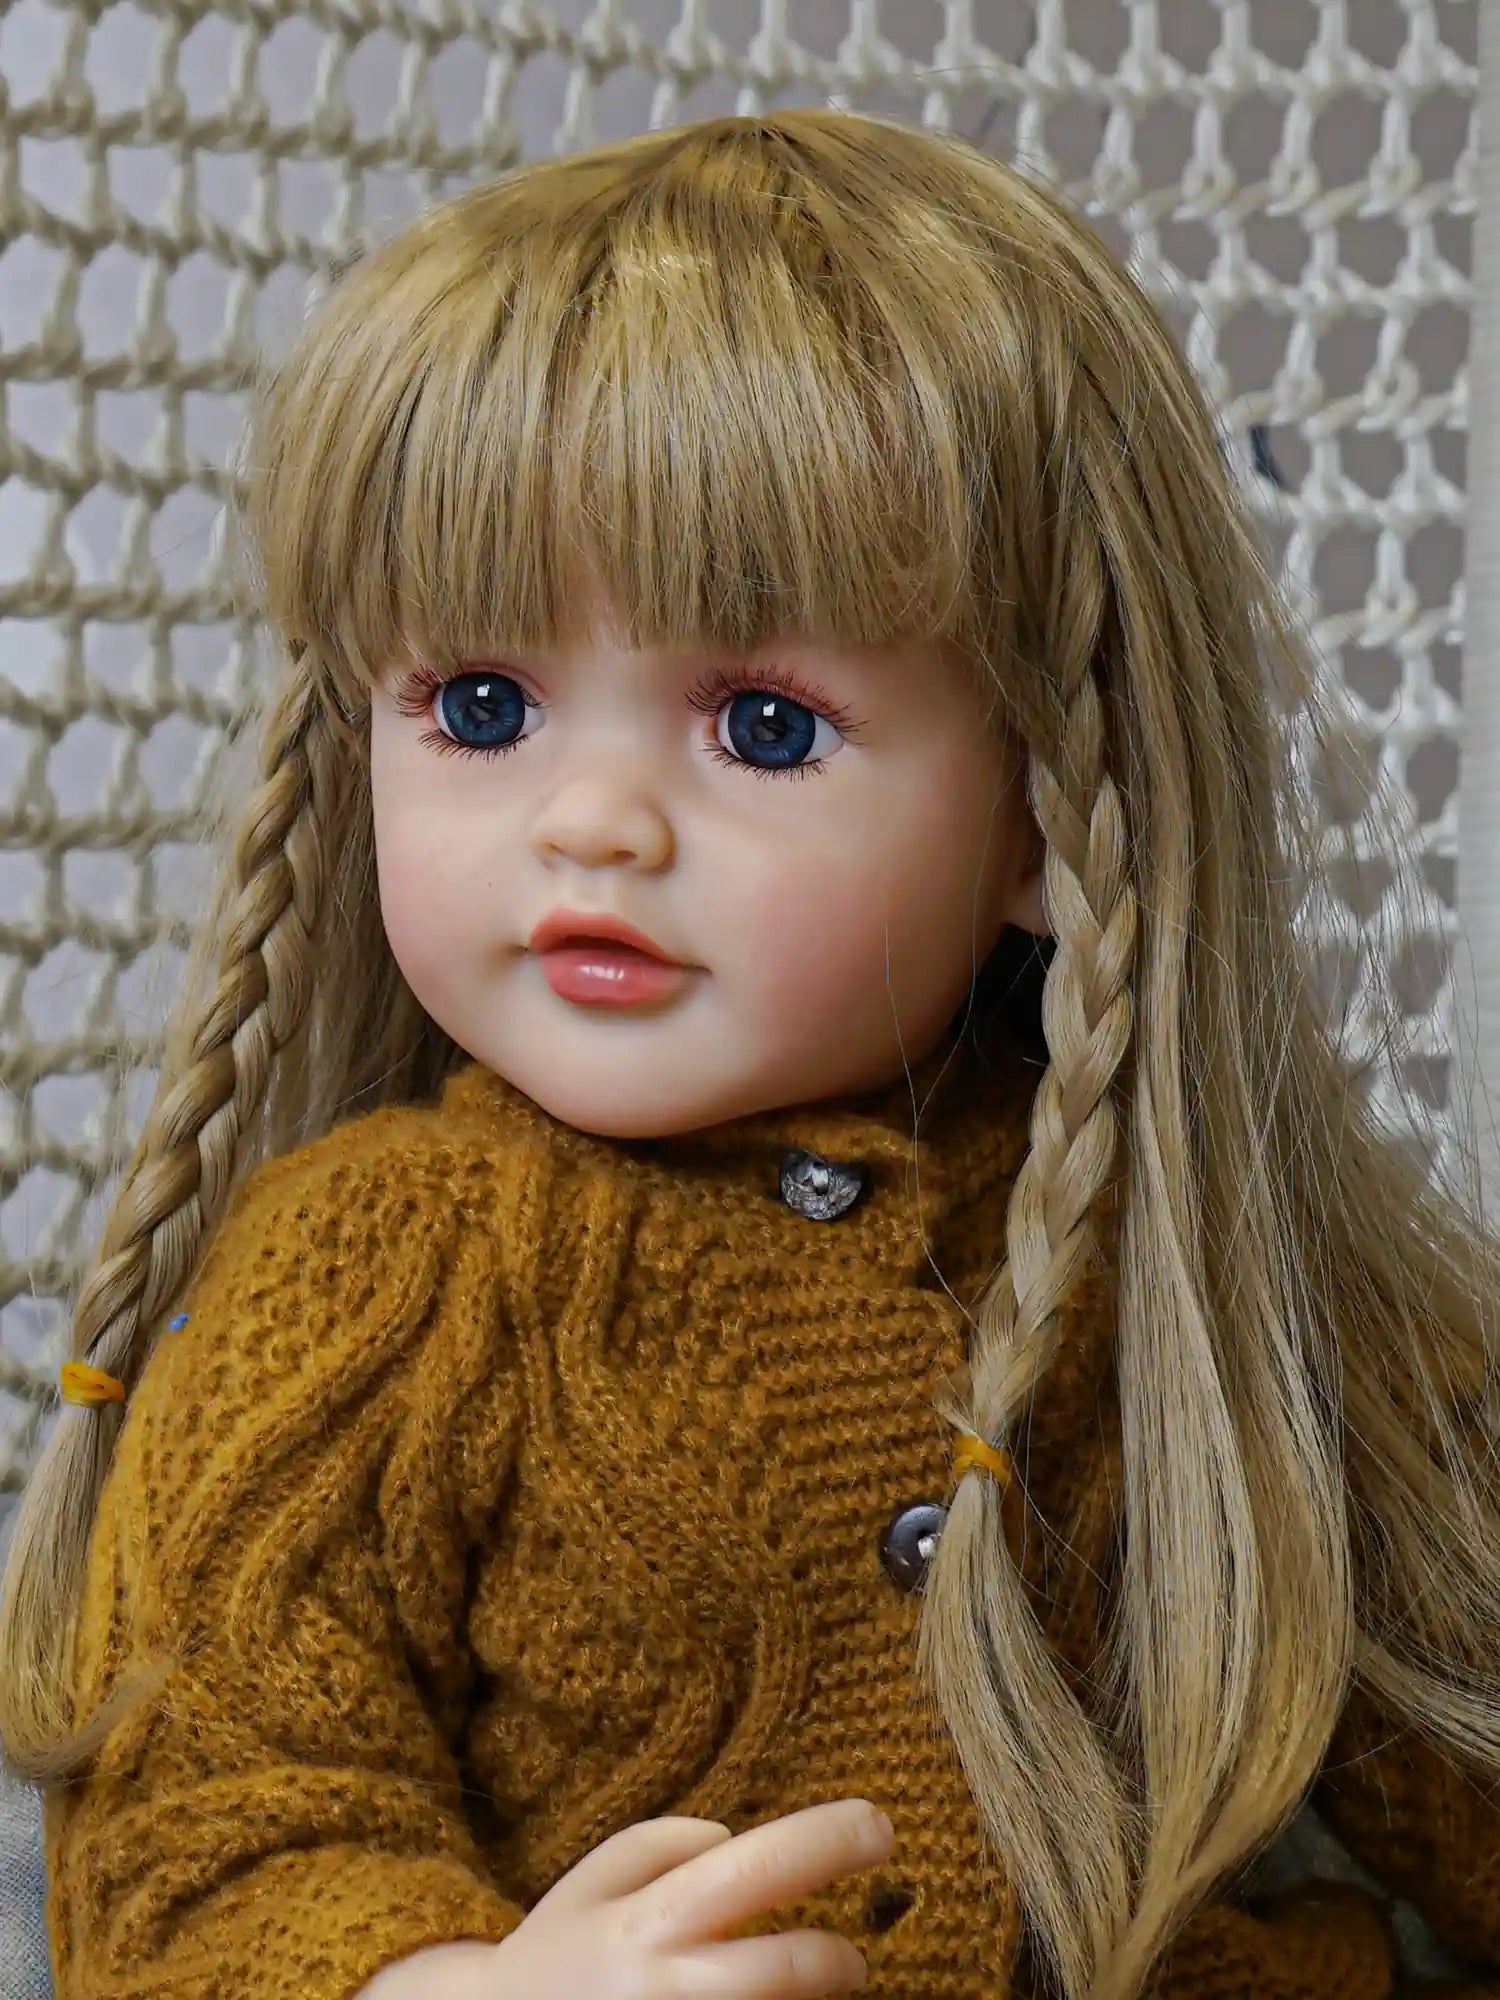 A doll with lifelike features, including blonde braided hair and bright blue eyes, wears a mustard knit sweater and hat, seated against a grey backdrop with a crochet pattern behind.